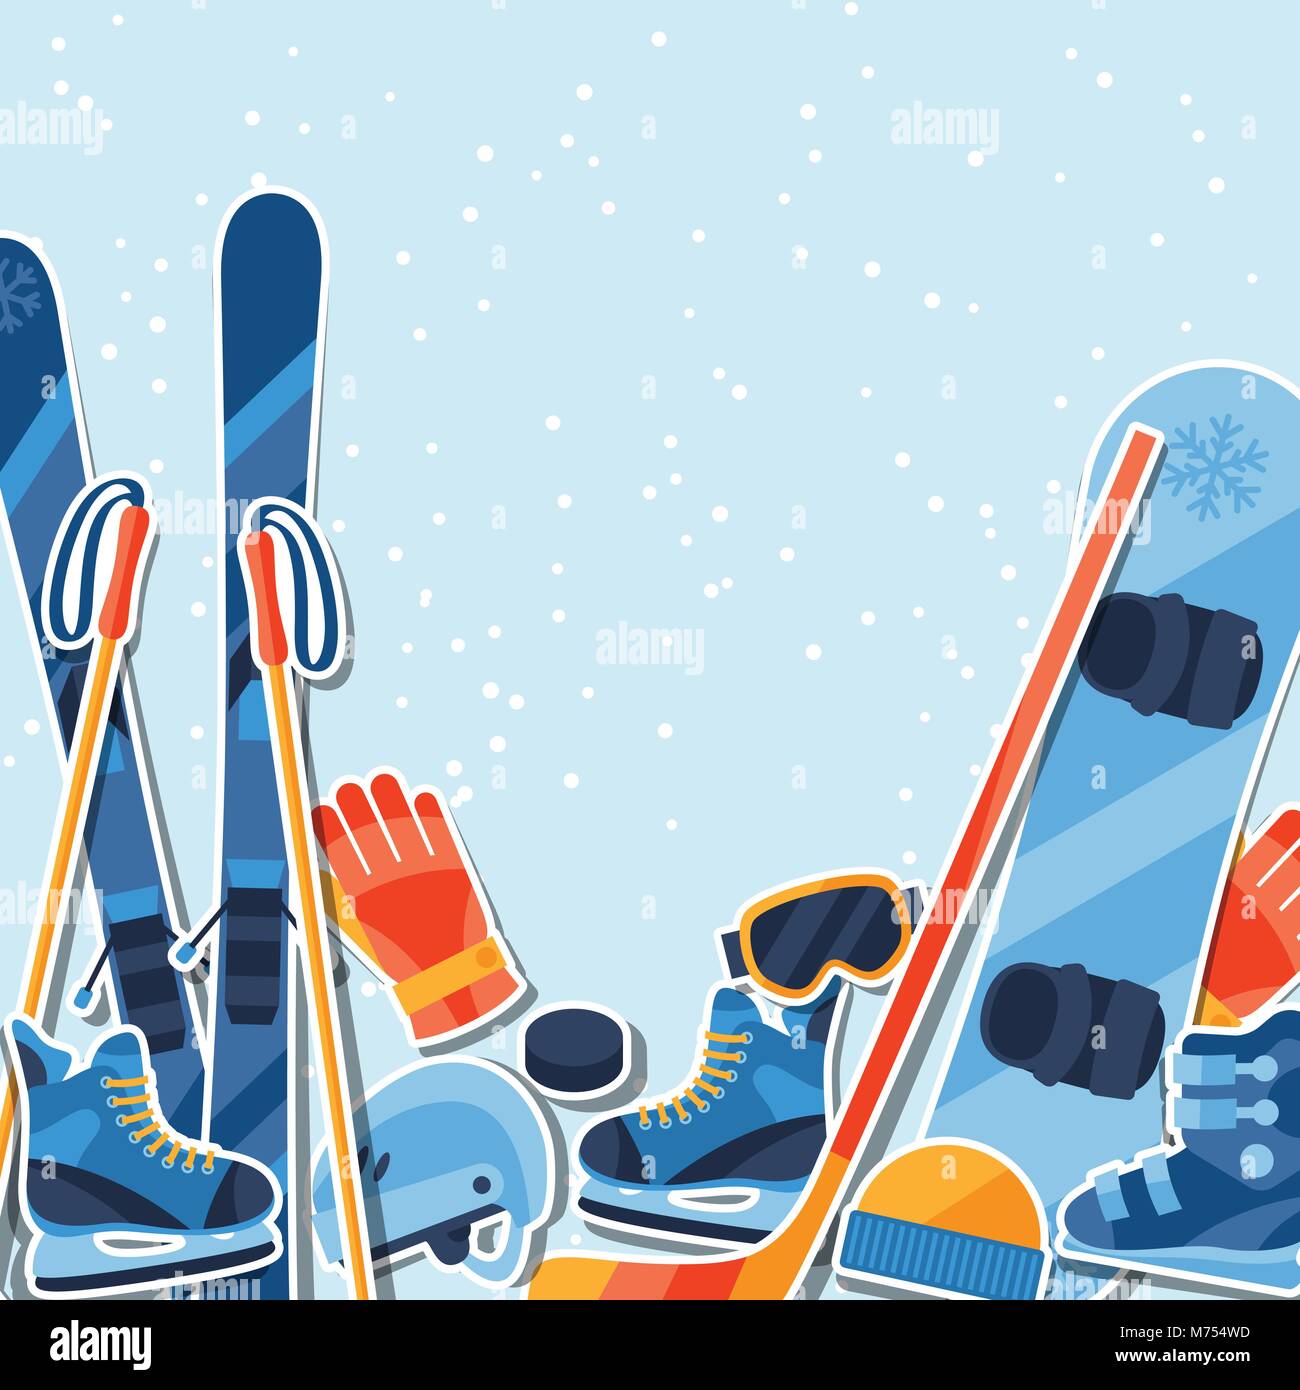 Winter sports background with equipment sticker flat icons Stock Vector